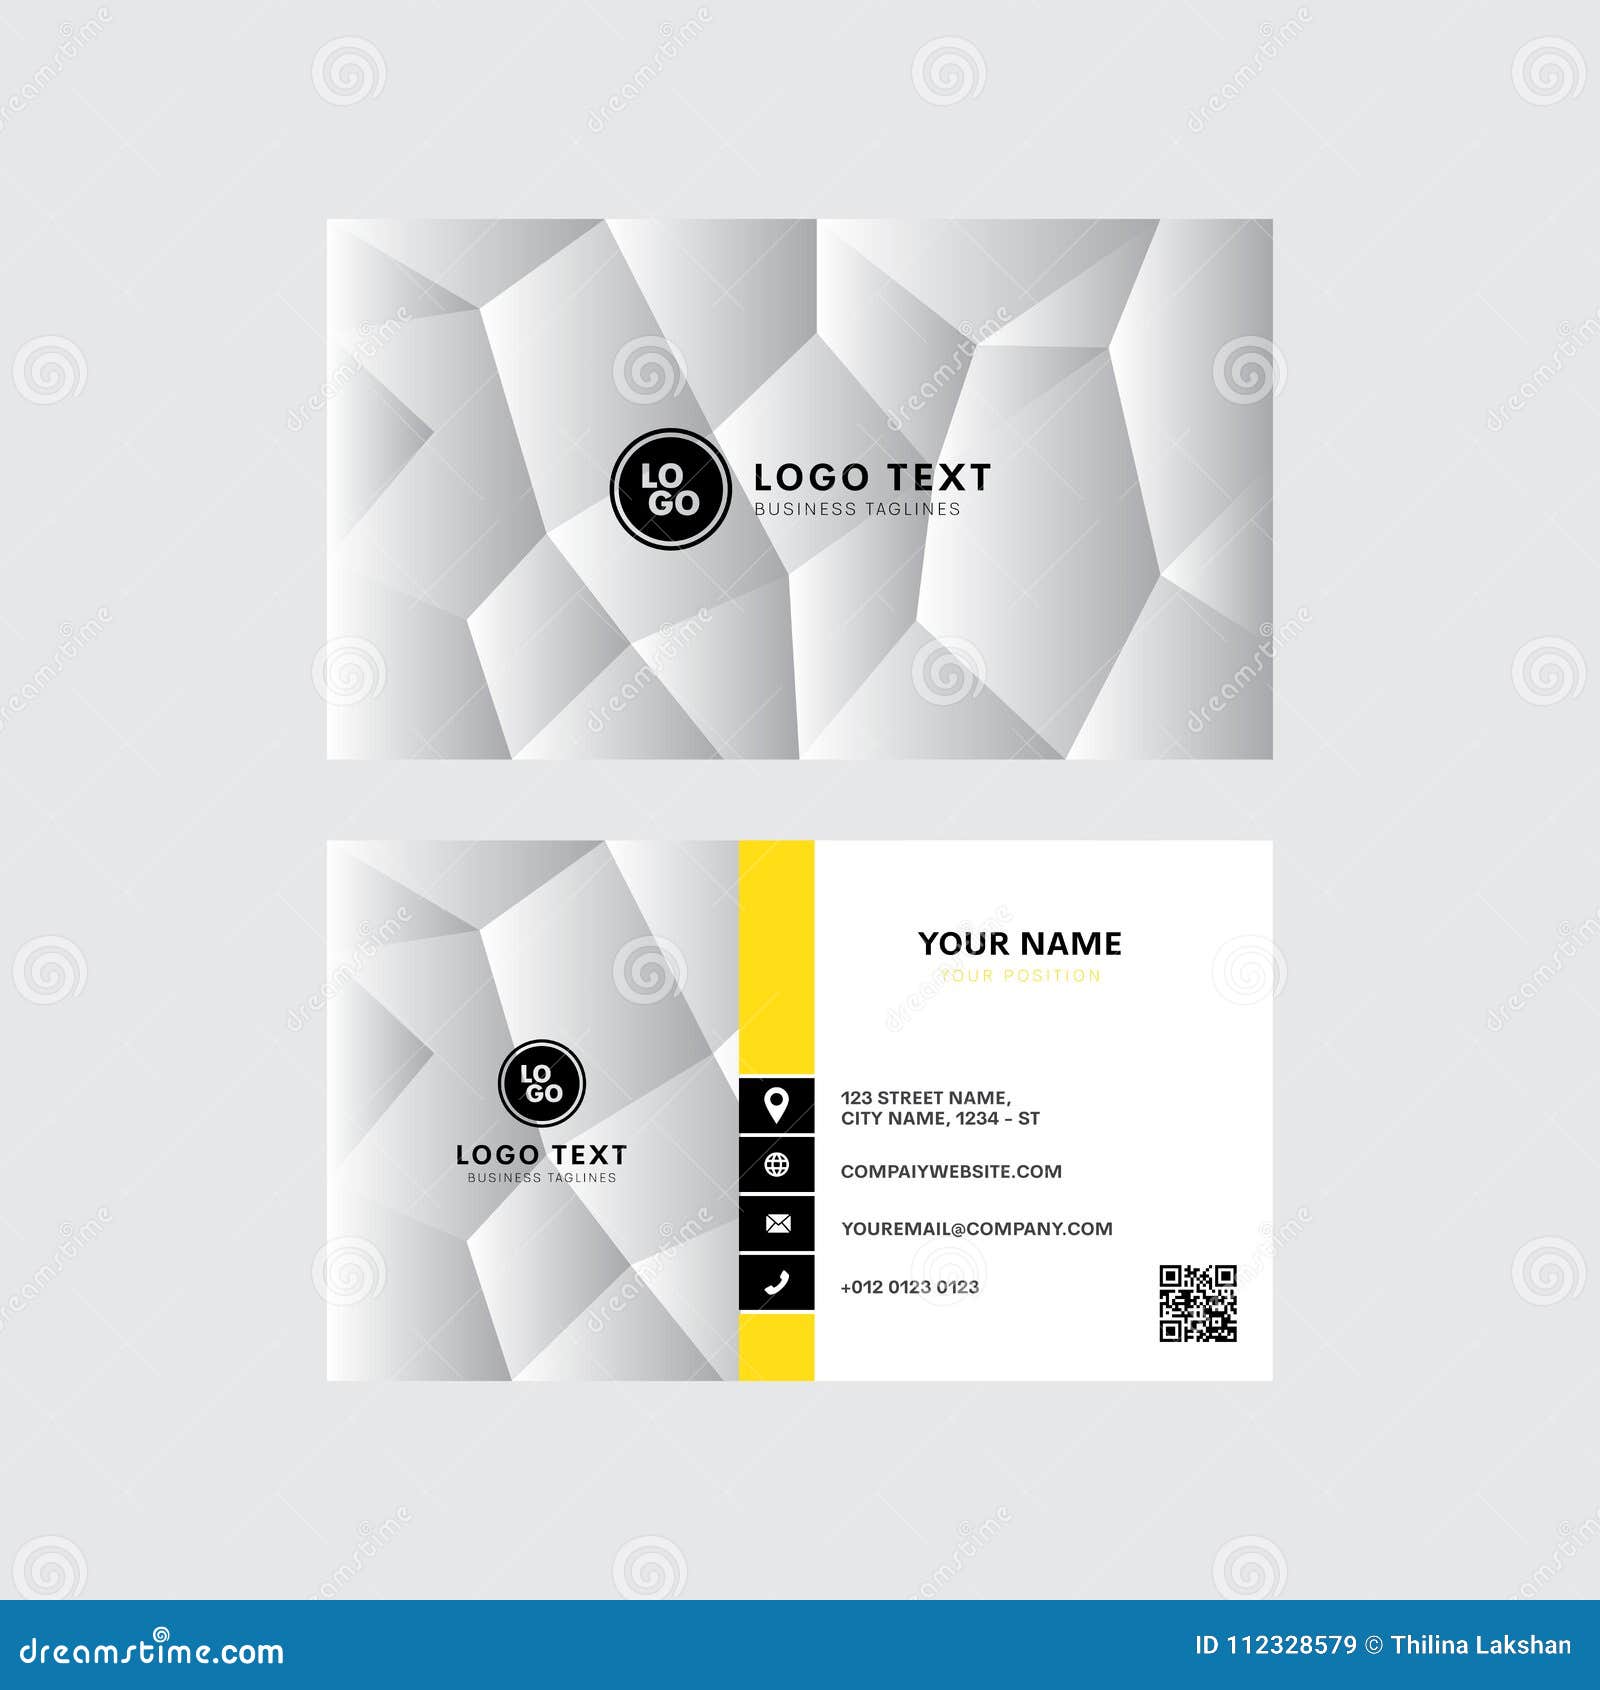 Professional Business Card Vector Design, Invitation Card Template Intended For Professional Business Card Templates Free Download